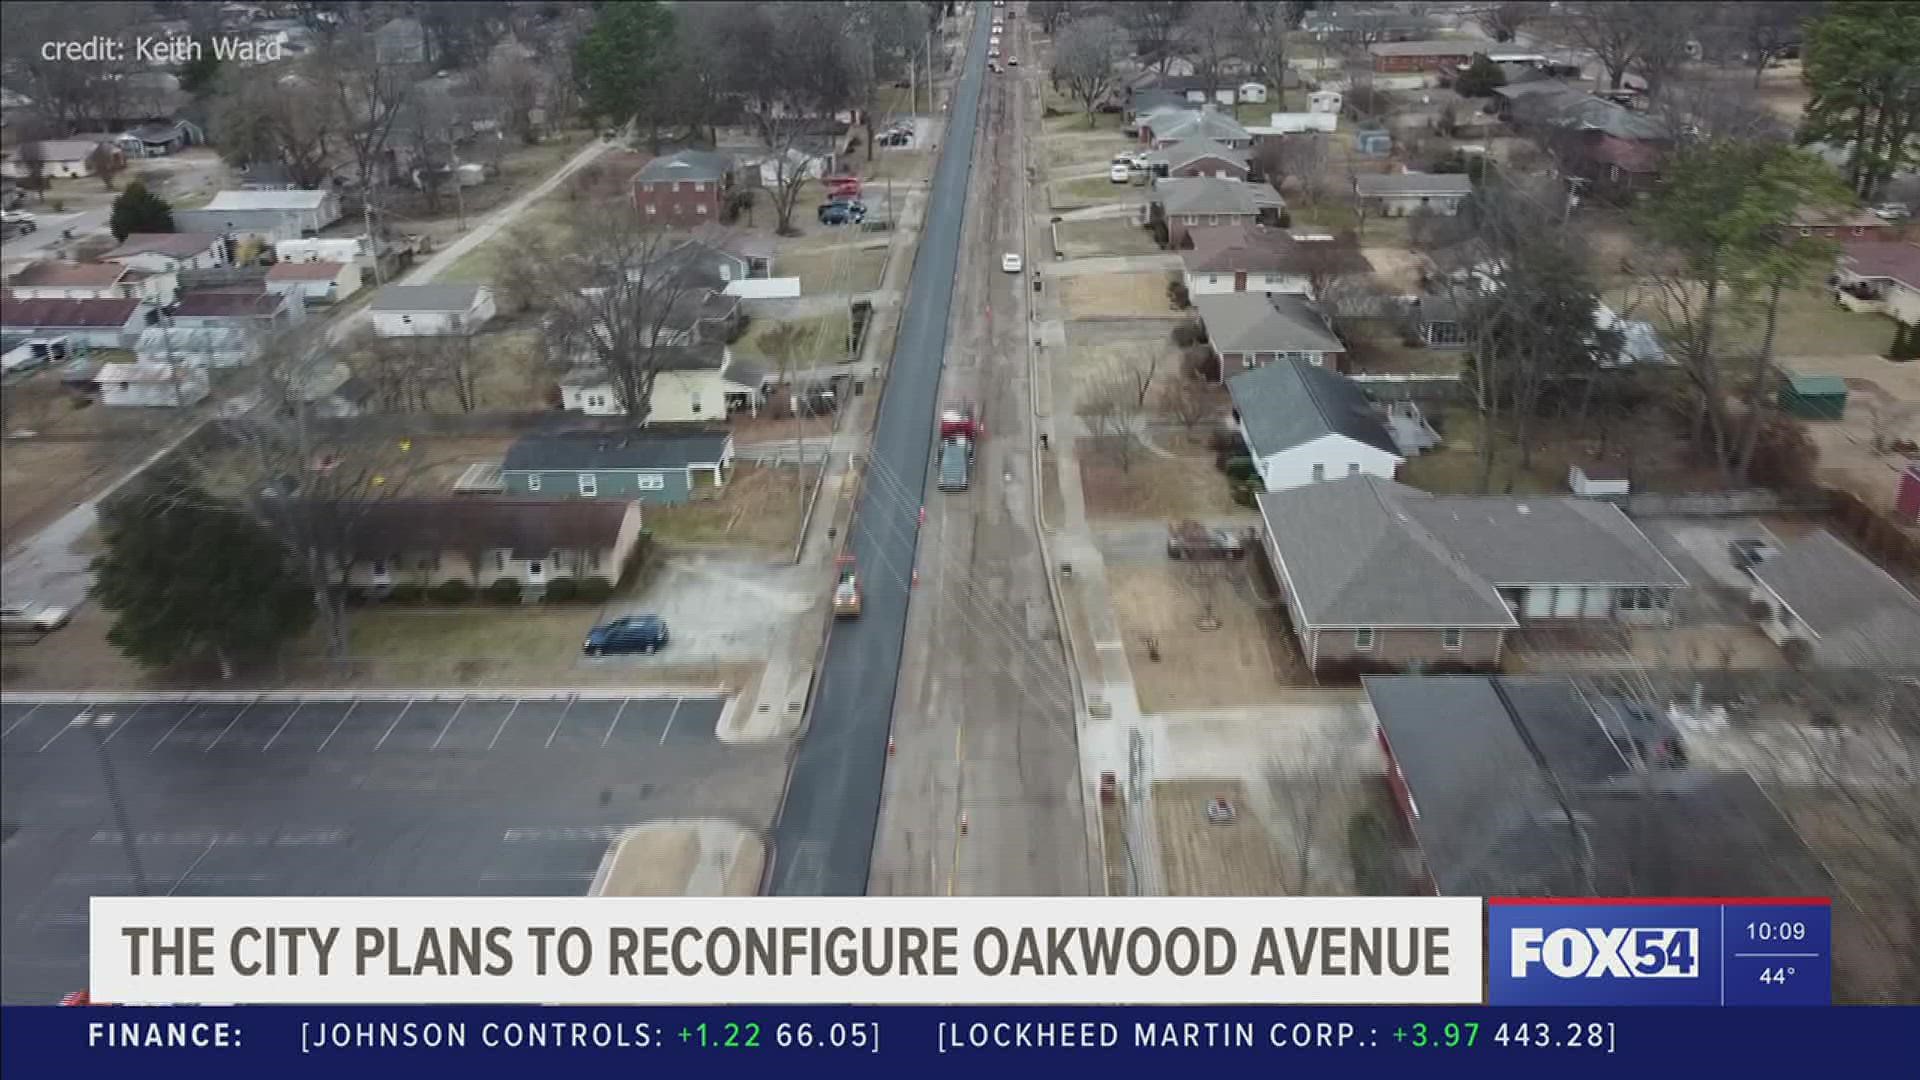 A large section of Oakwood Avenue was repaved recently. The City of Huntsville says next steps include reconfiguration and re-stripping the route.